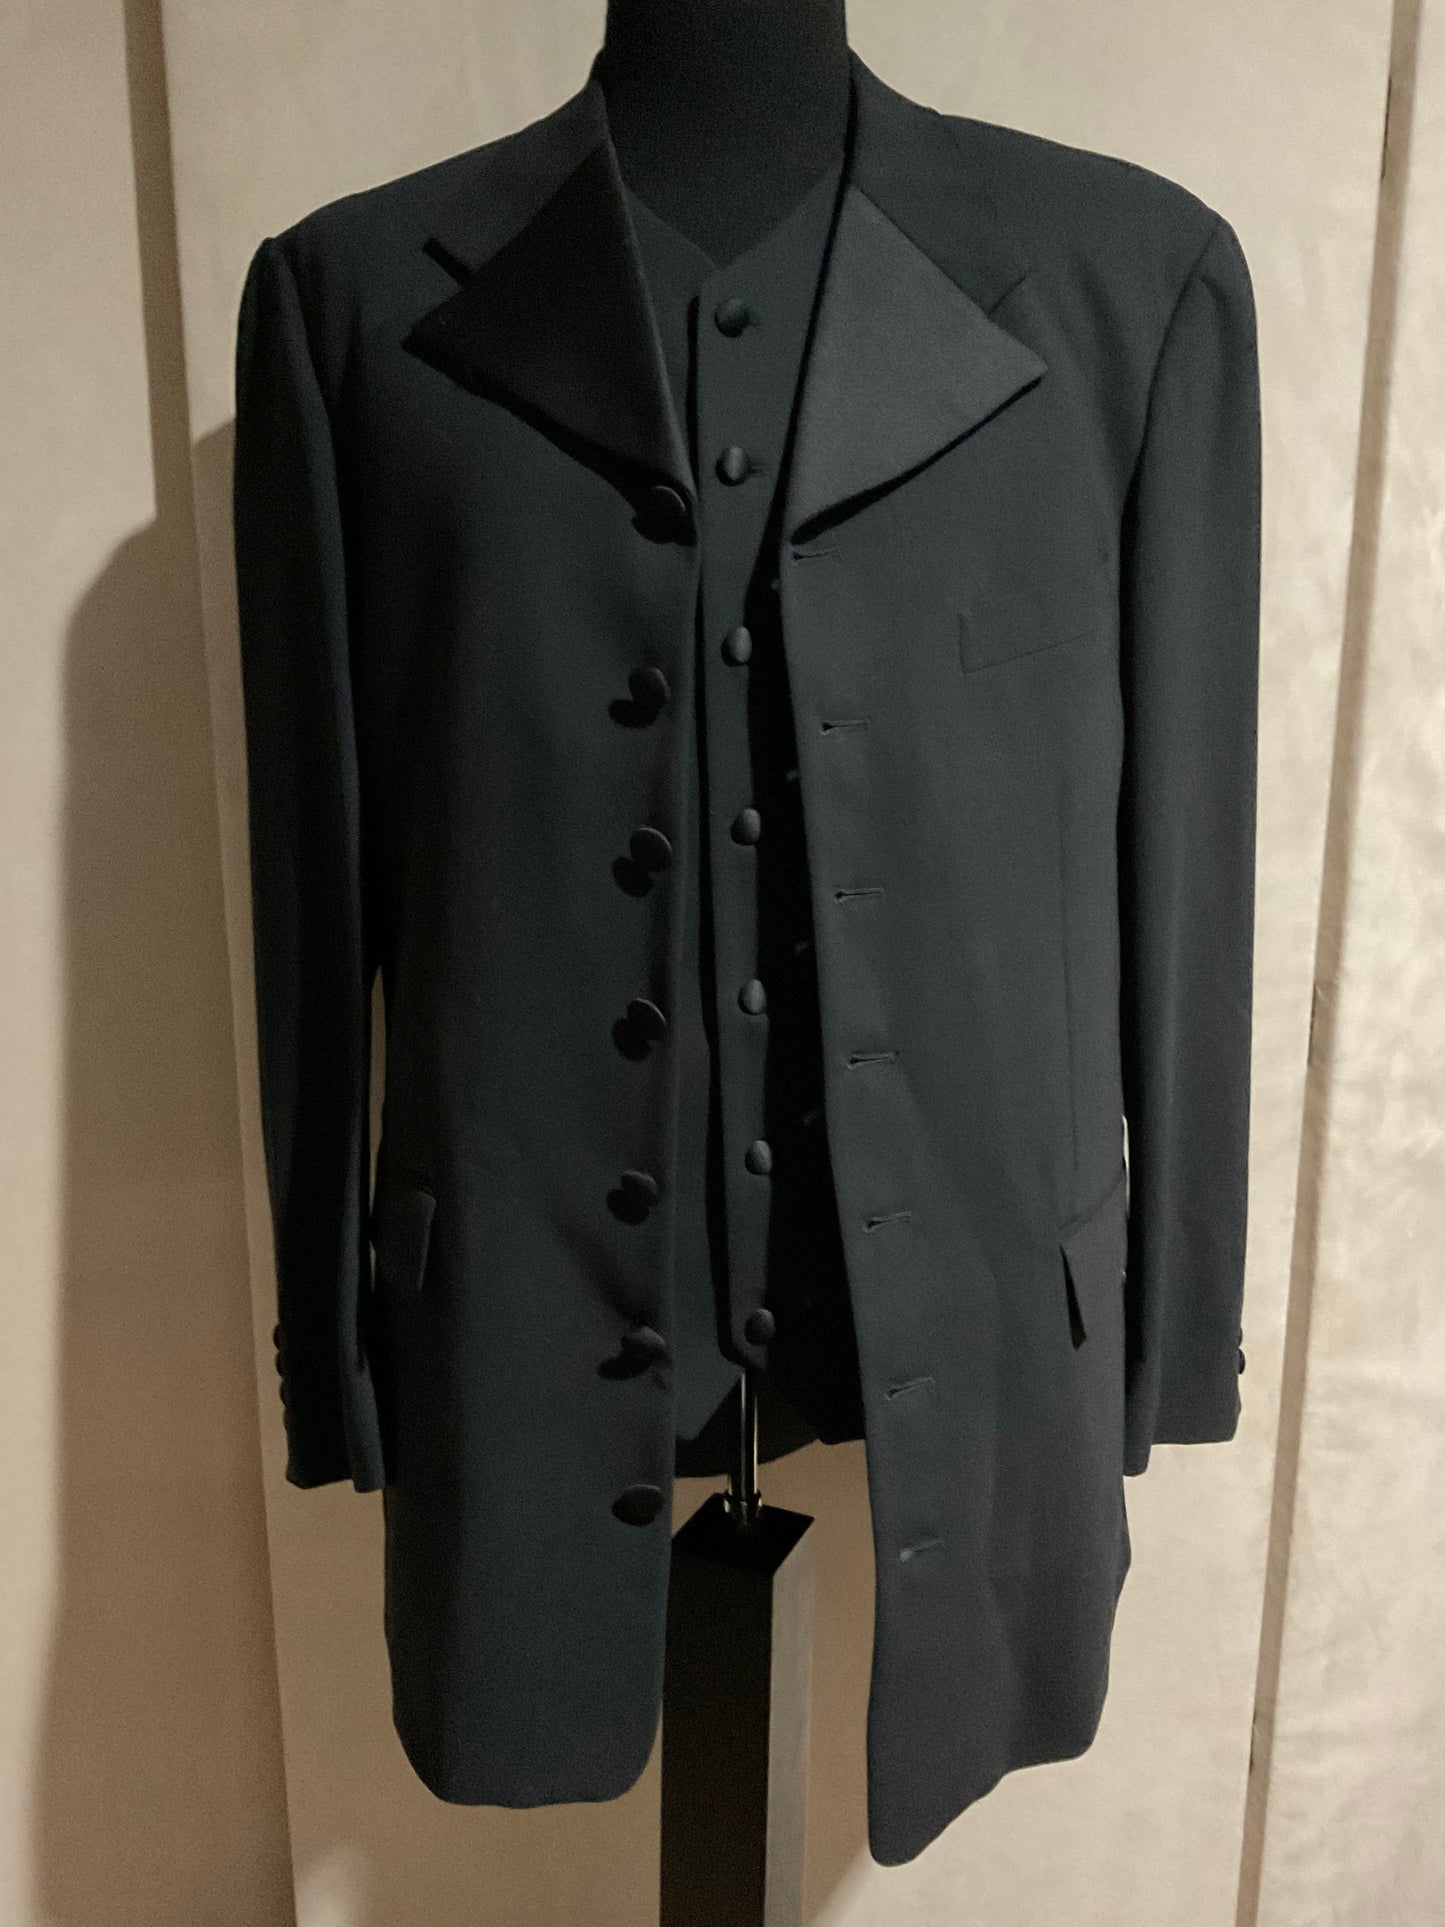 R P TUXEDO & VEST / 7 BUTTON BLACK CREPE / NEW / 42 REG OR LONG / MADE IN ITALY